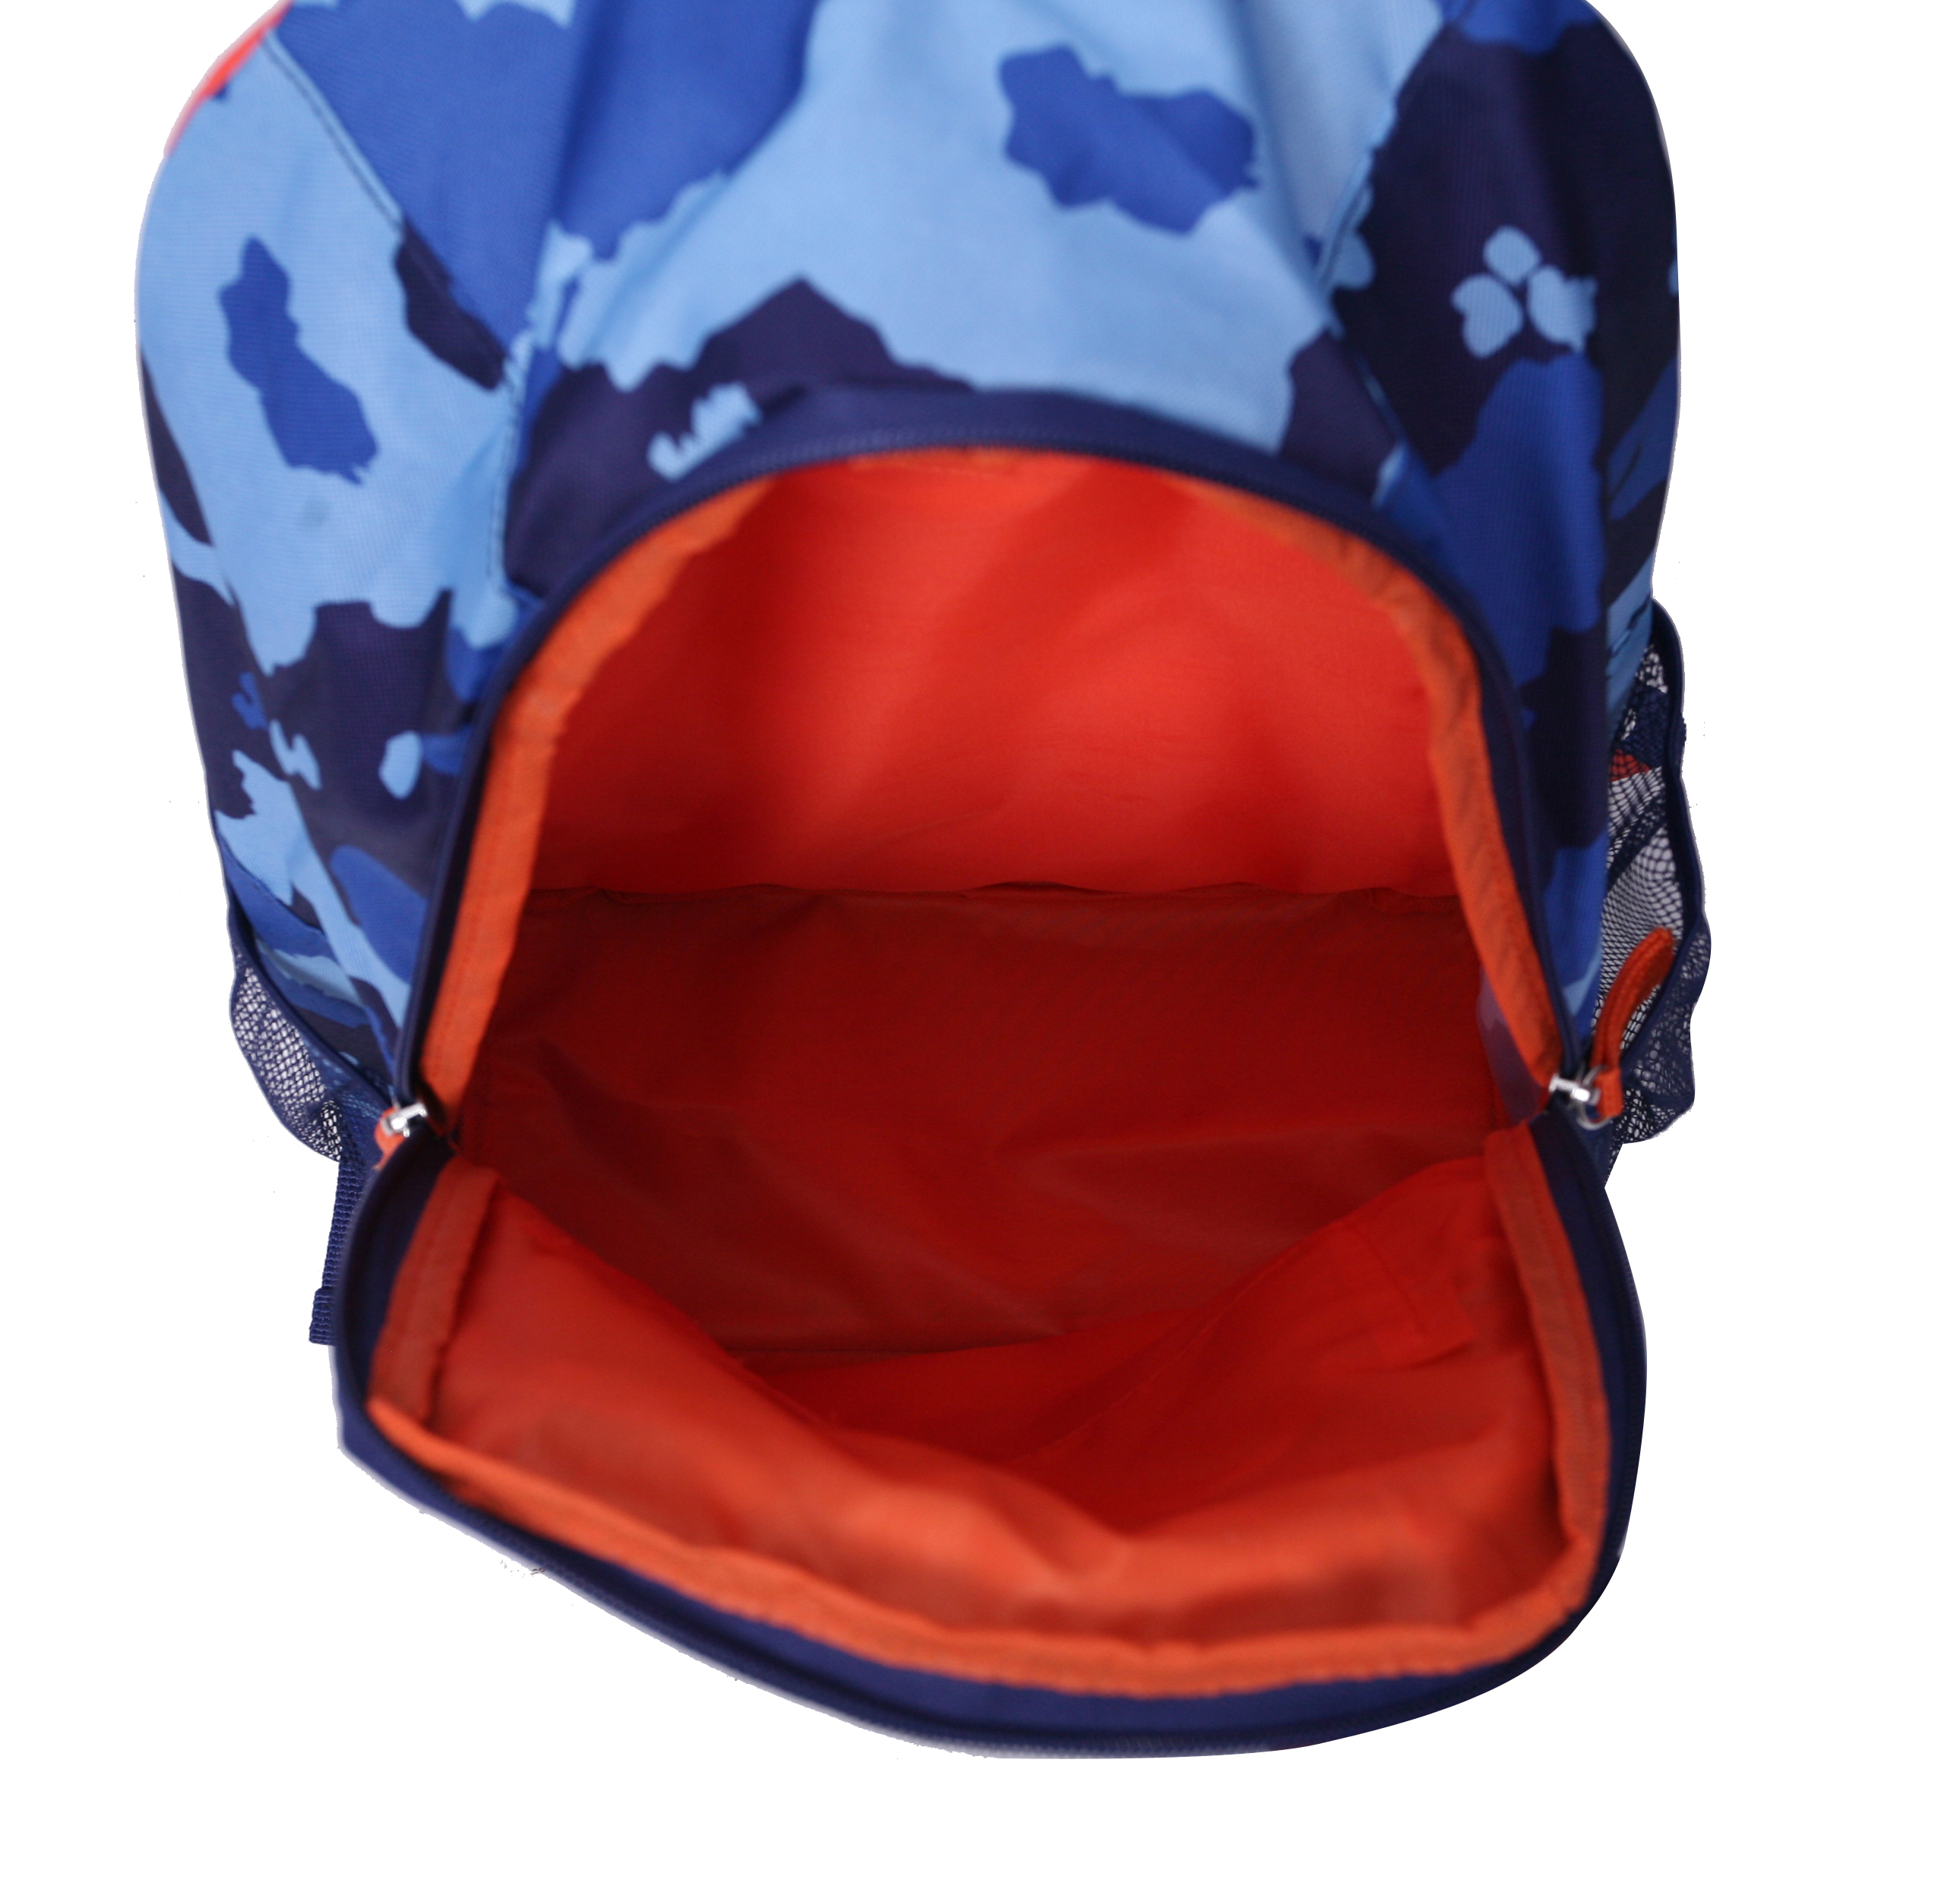 Crckt Kids Boys 15" School Backpack with Plush Dangle, Blue Camo Print - image 5 of 8